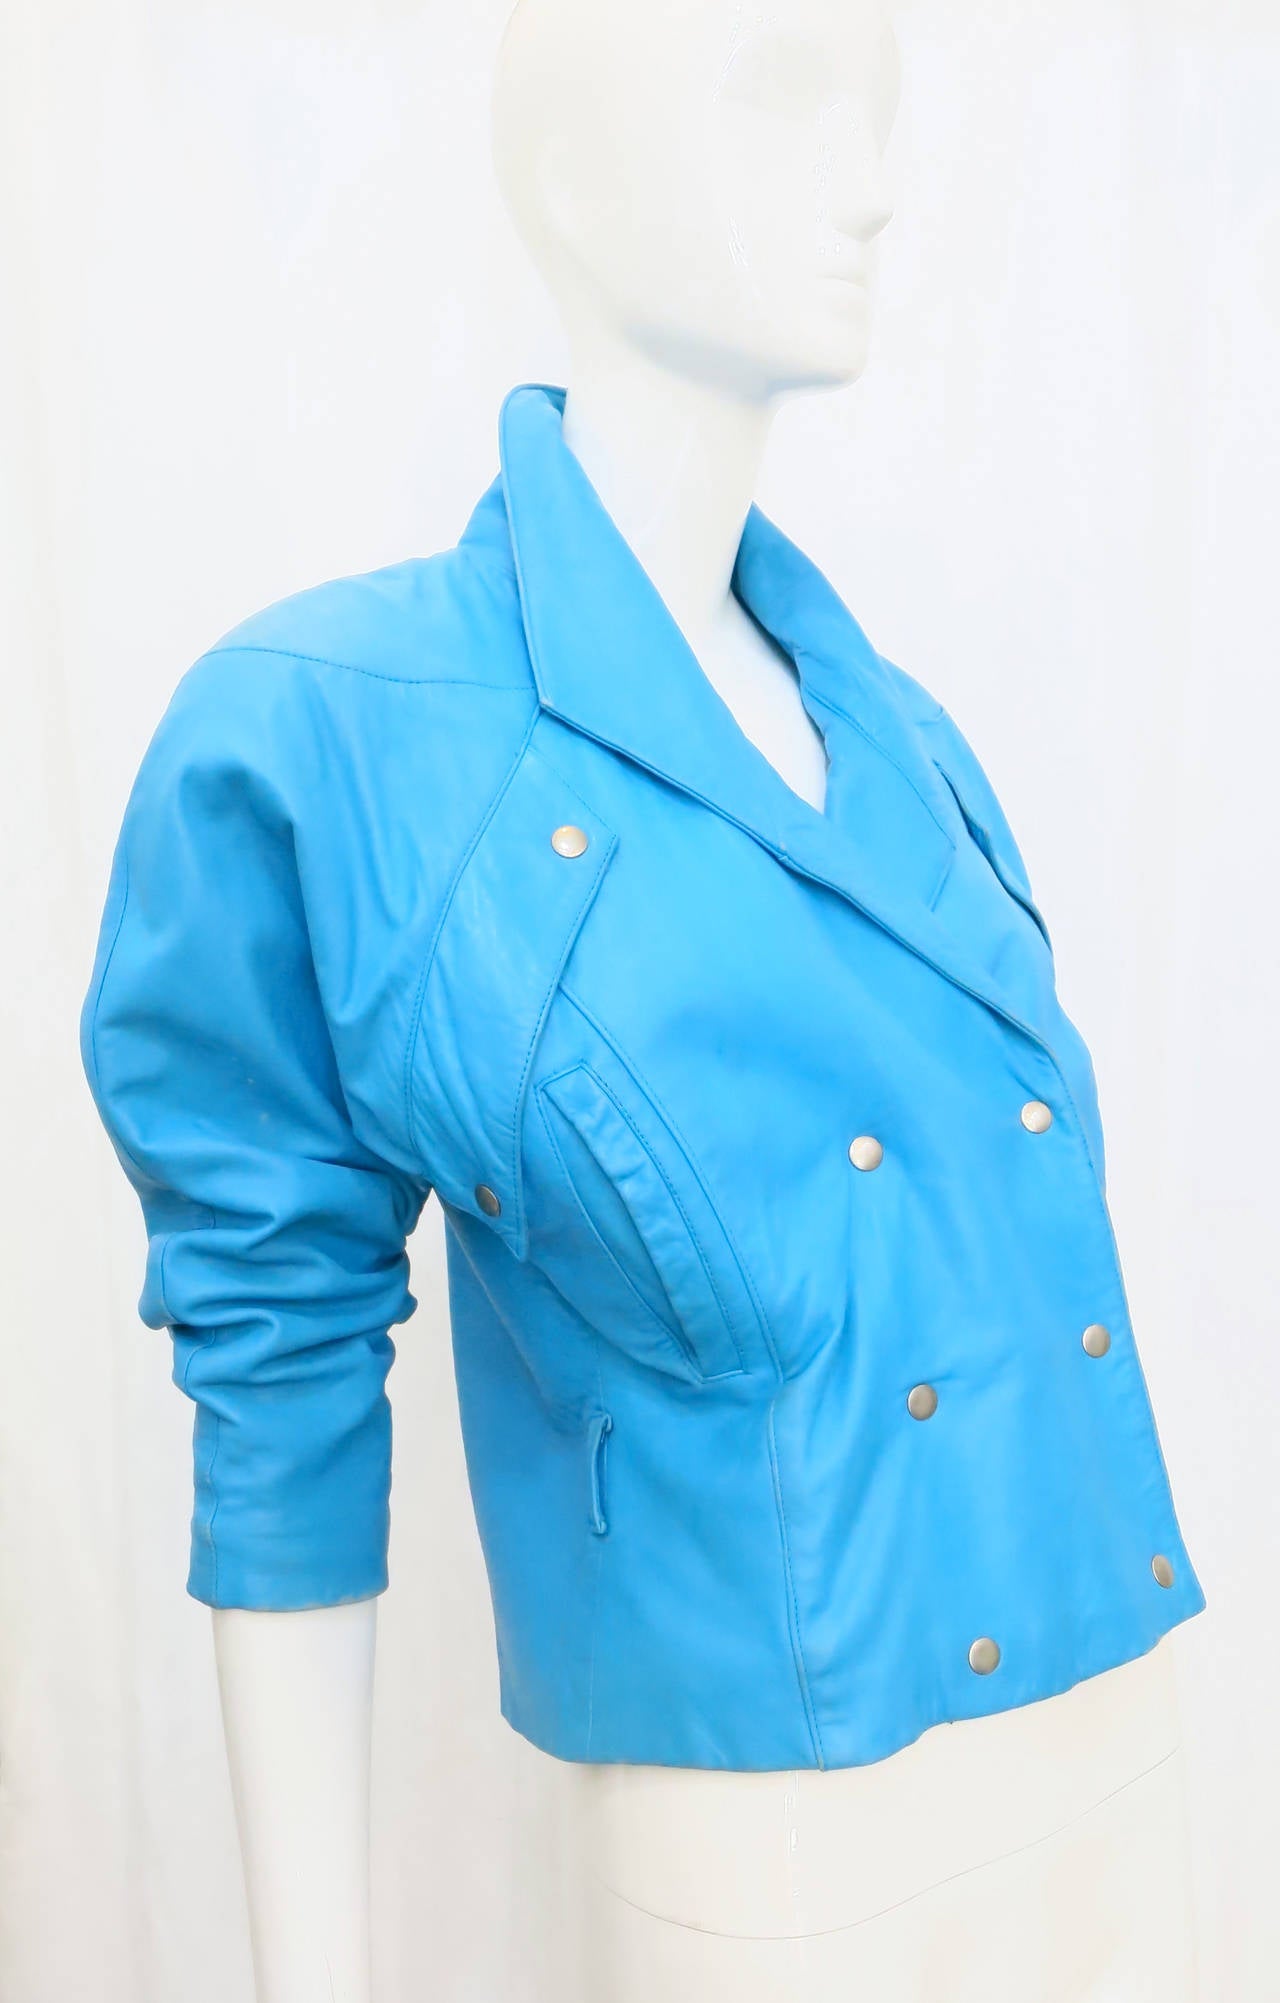 Stand out from the crowd with this vibrant 1980s electric blue motorcycle jacket from Michael Hoban. 

Additional measurements: 16